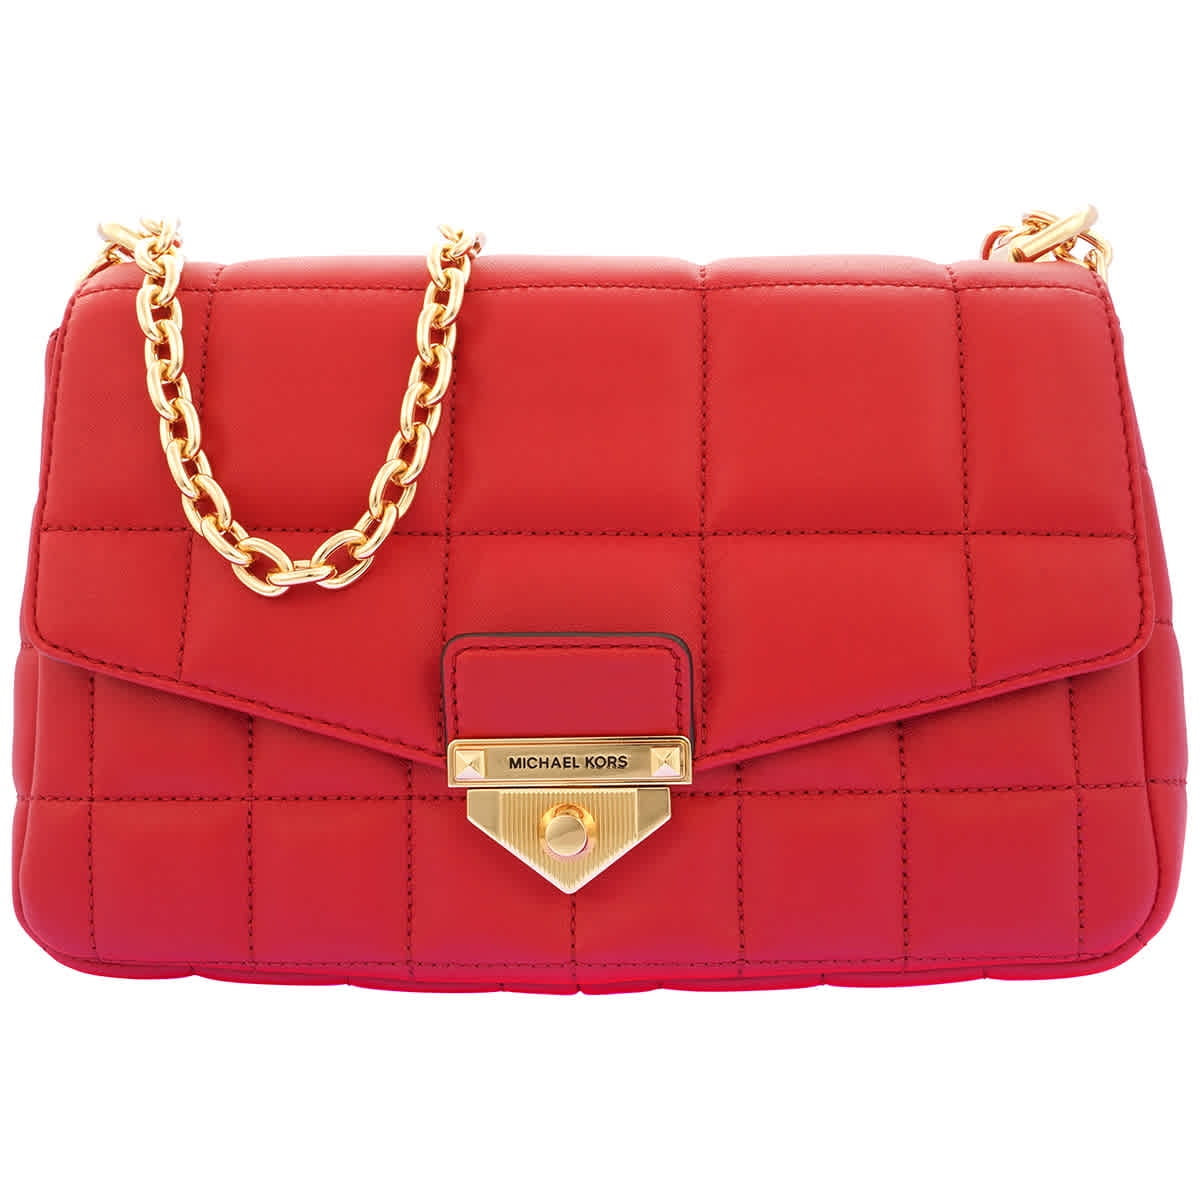 MICHAEL KORS: Soho Michael bag in quilted leather - Red